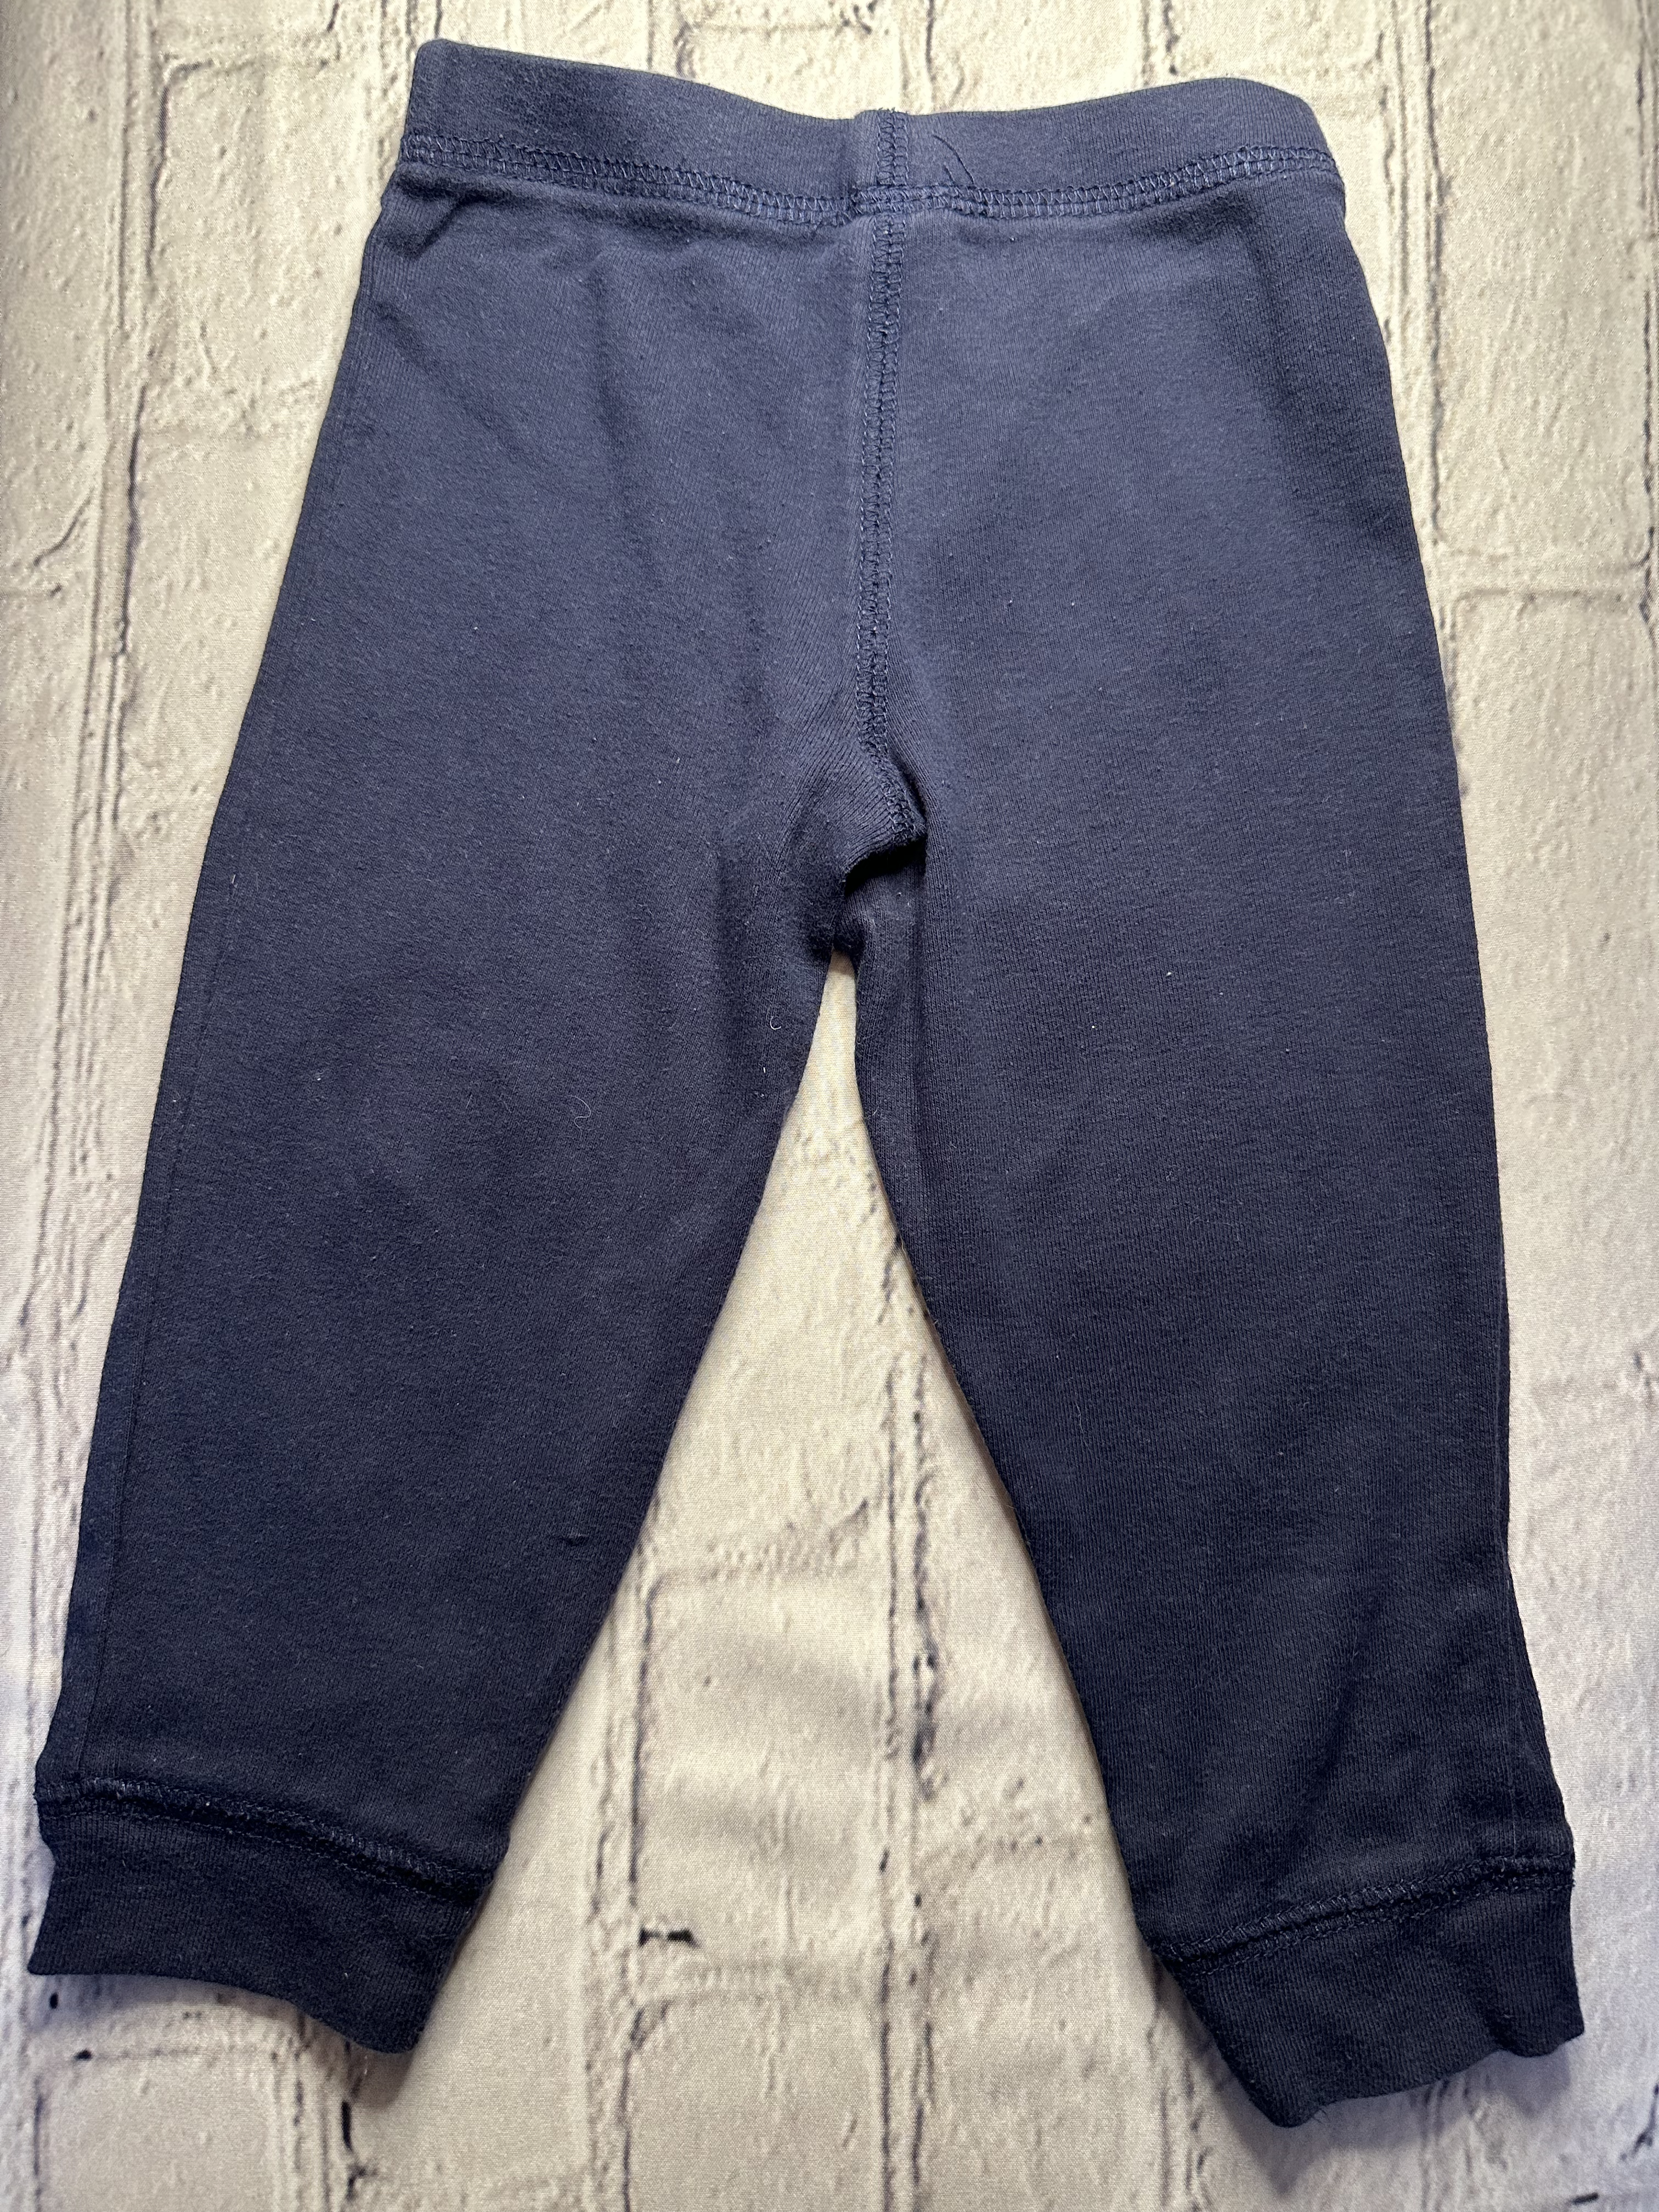 Carter’s, 18 Mo, Jogger sweatpants, navy, football detail on left, ‘Touch Down’ detail on right